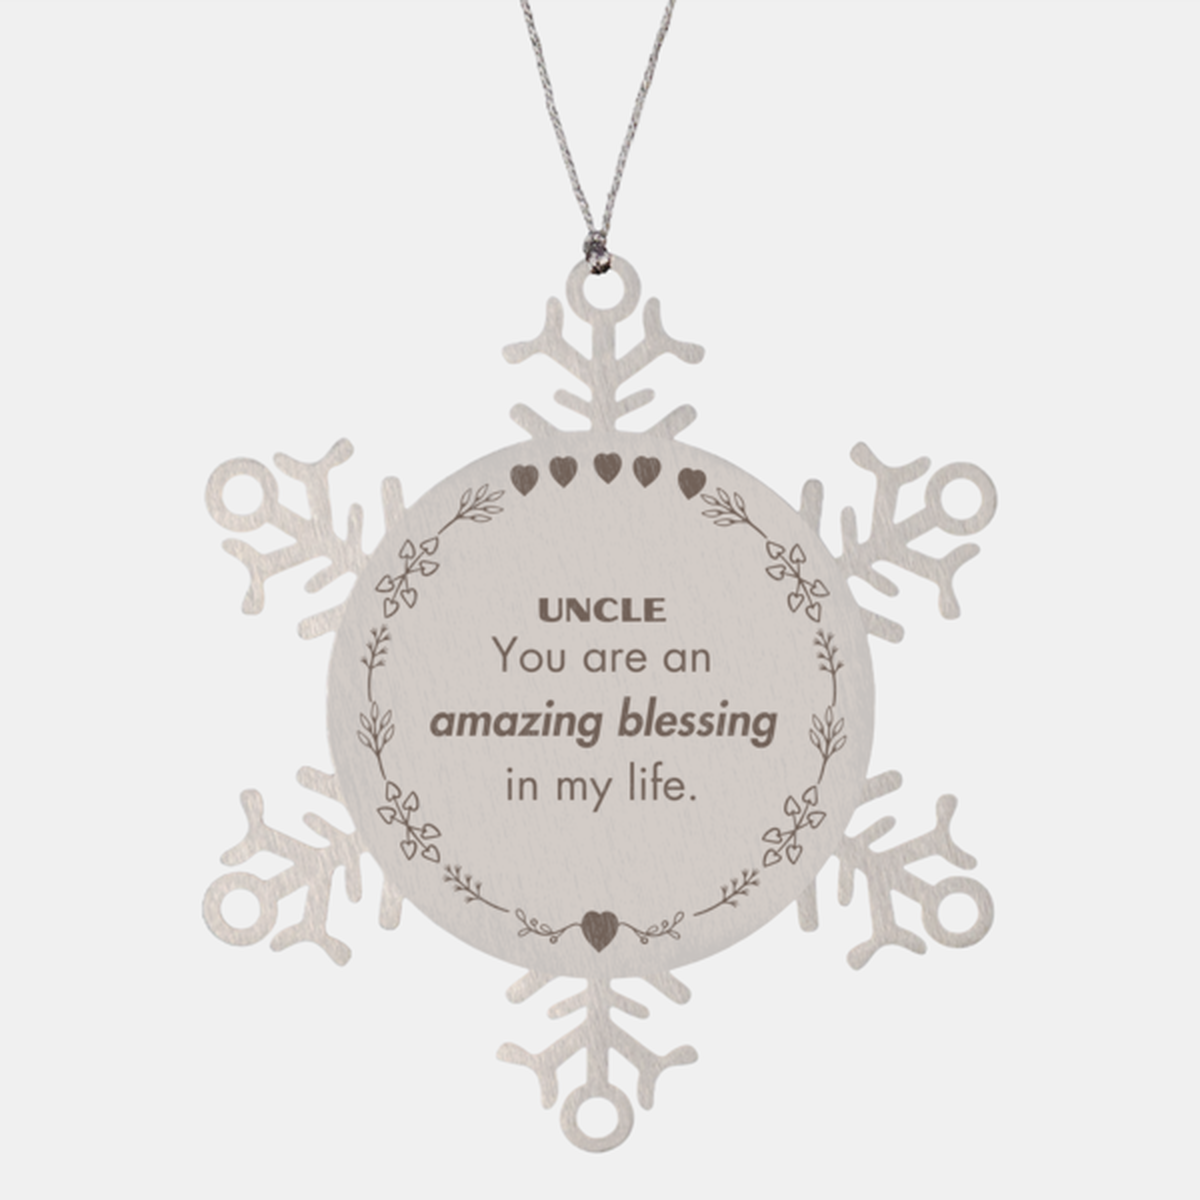 Uncle Snowflake Ornament, You are an amazing blessing in my life, Thank You Gifts For Uncle, Inspirational Birthday Christmas Unique Gifts For Uncle